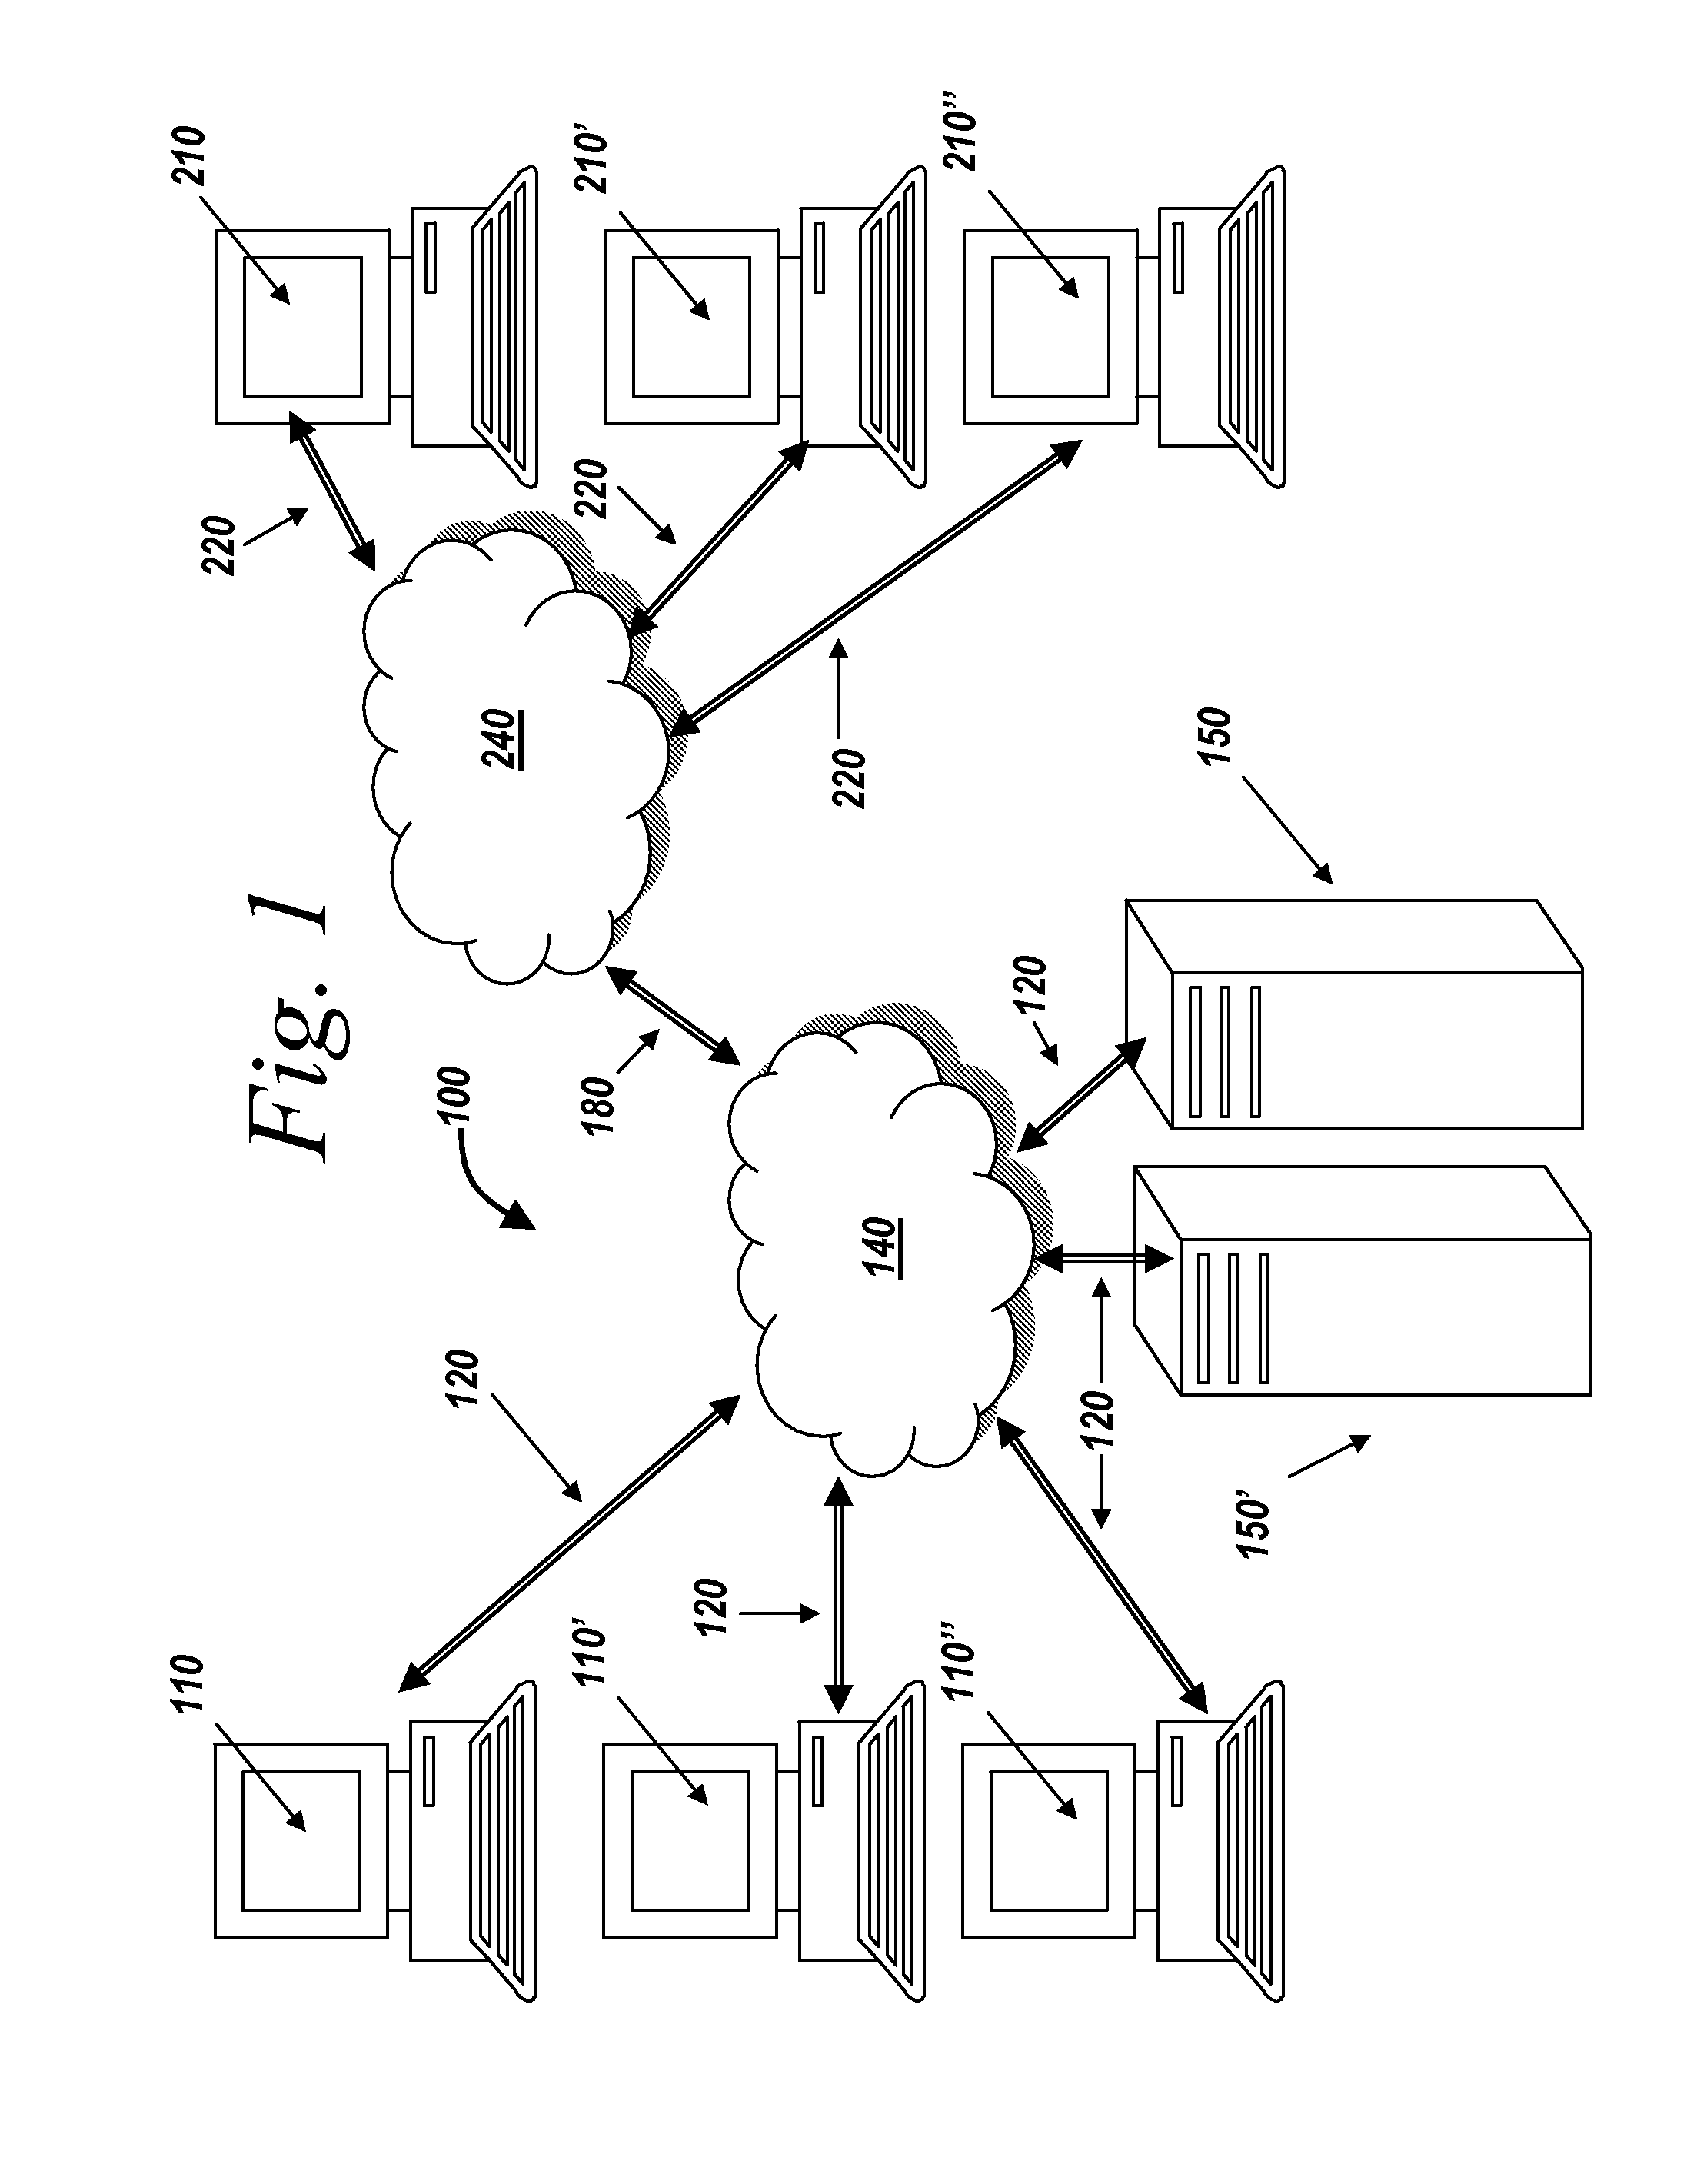 Systems and Methods for Infinite Information Organization